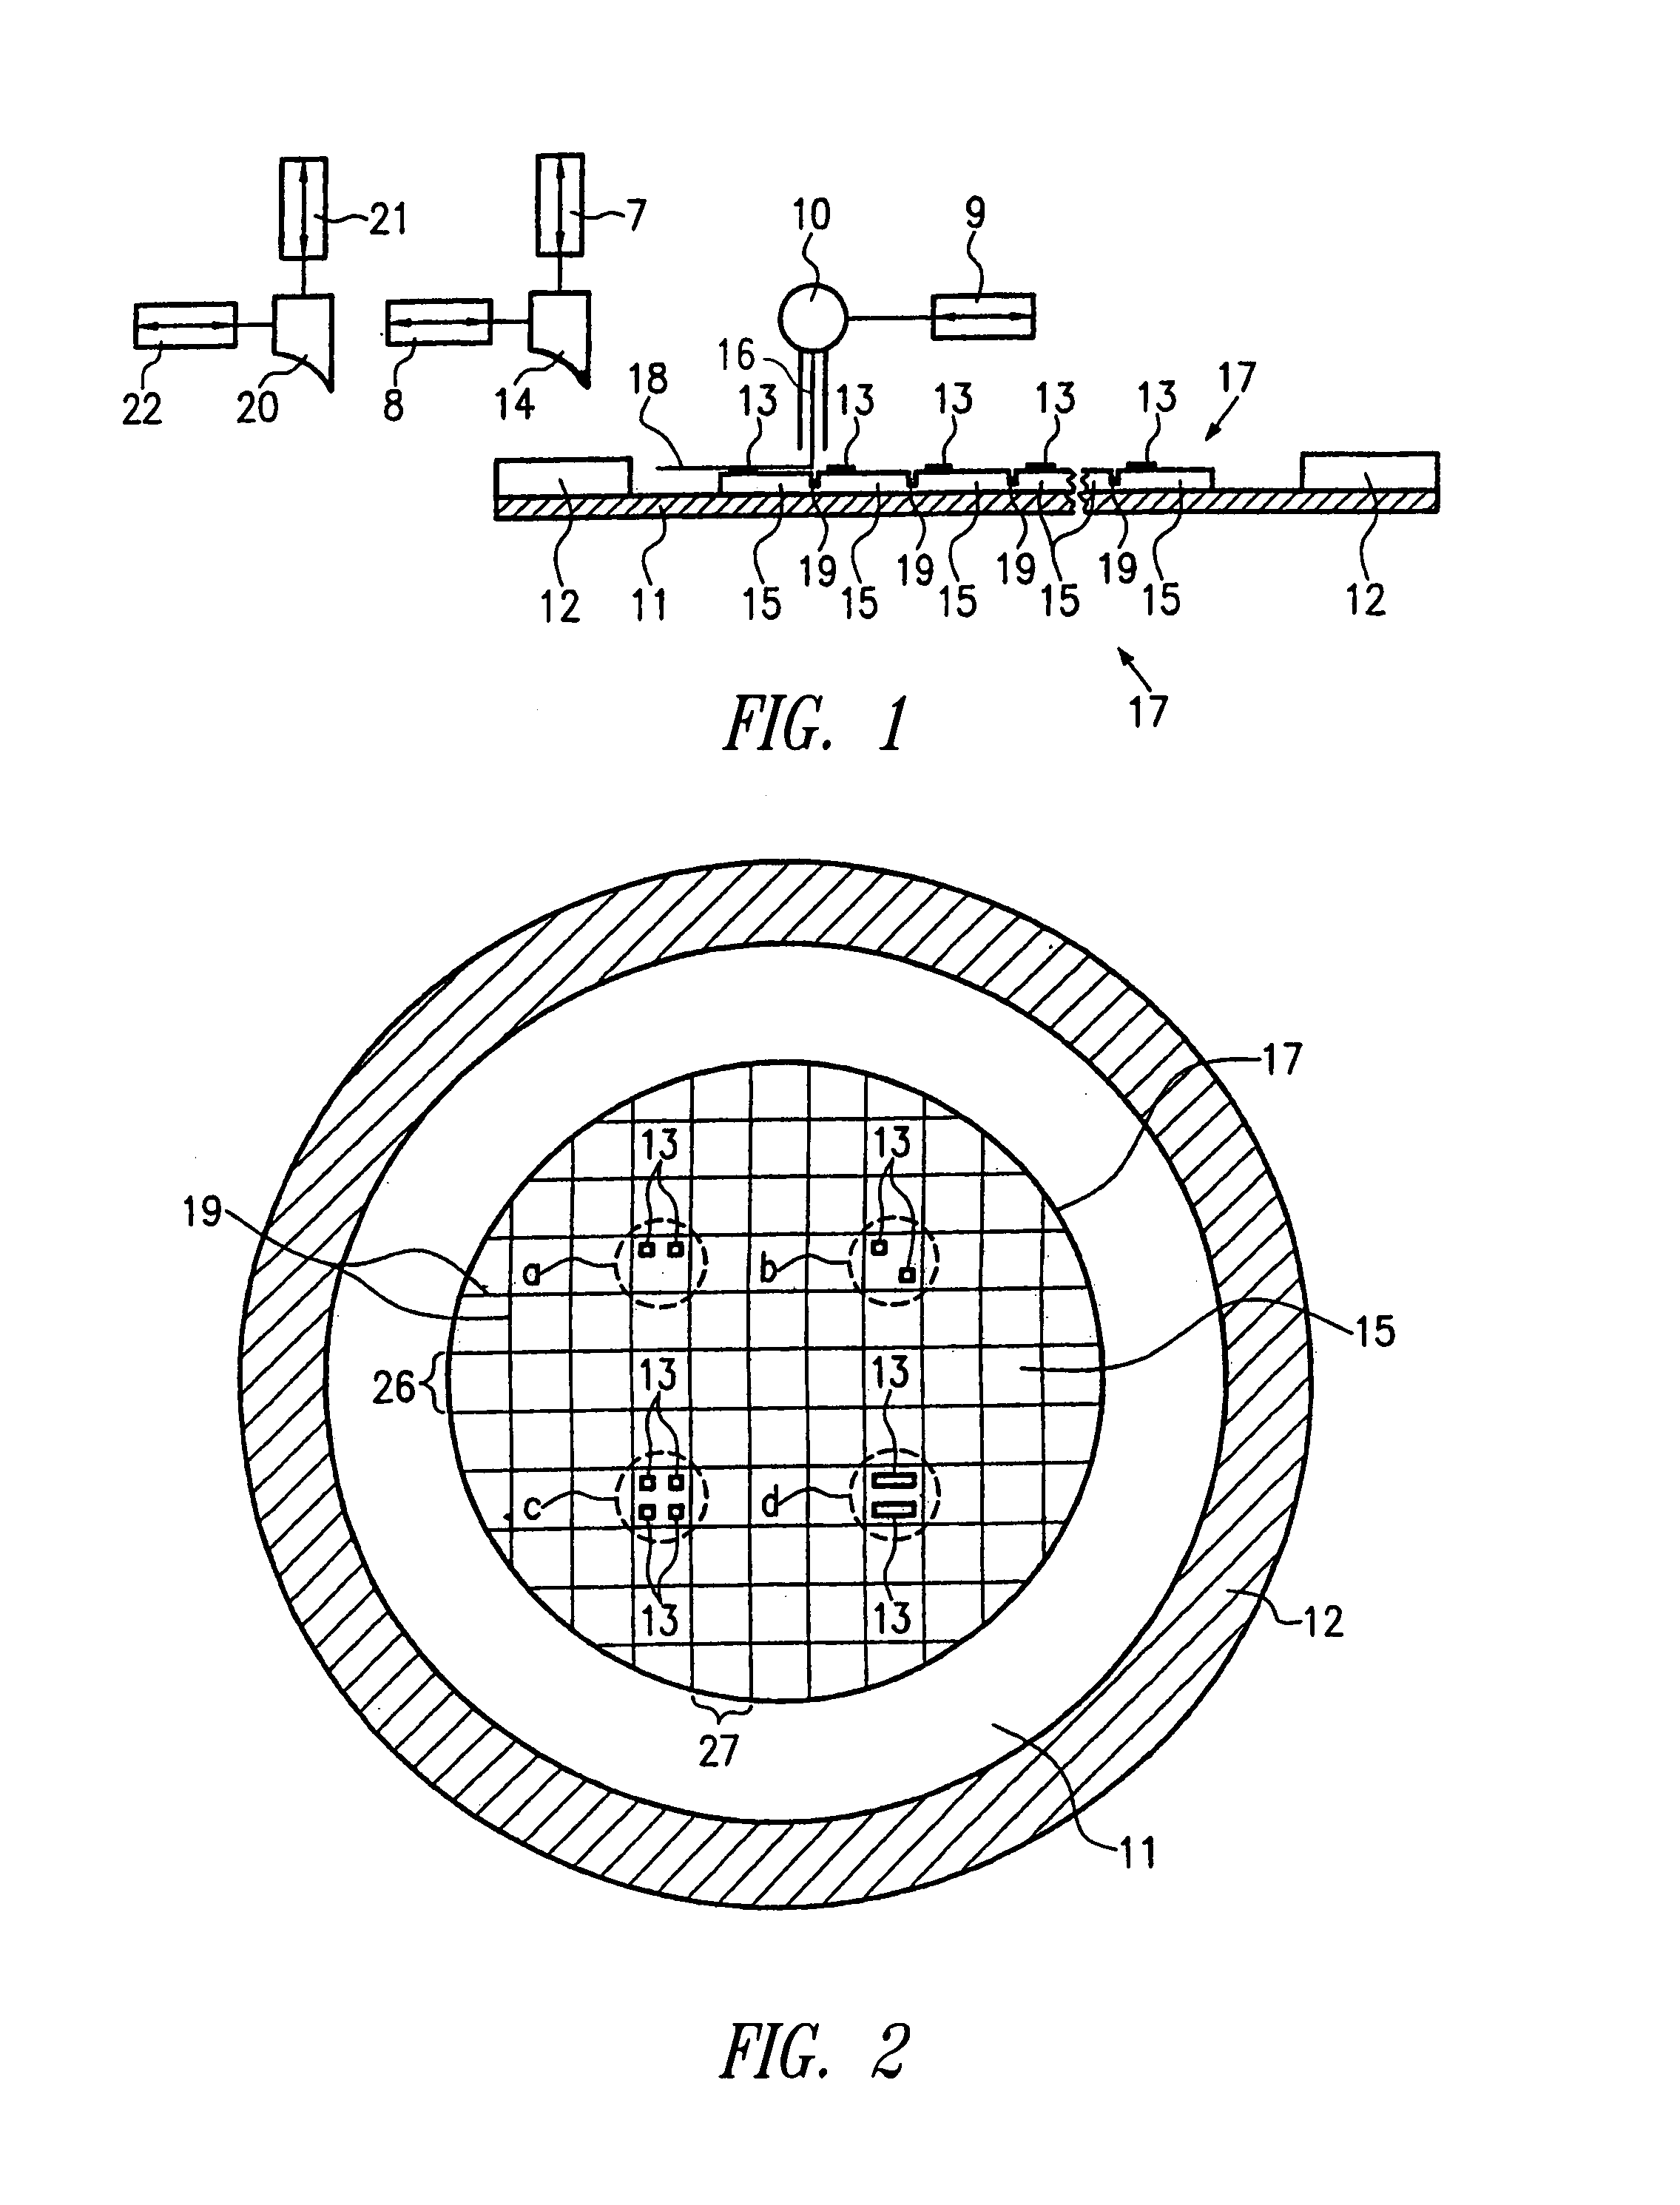 Method for production of contactless chip cards and for production of electrical units comprising chips with contact elements